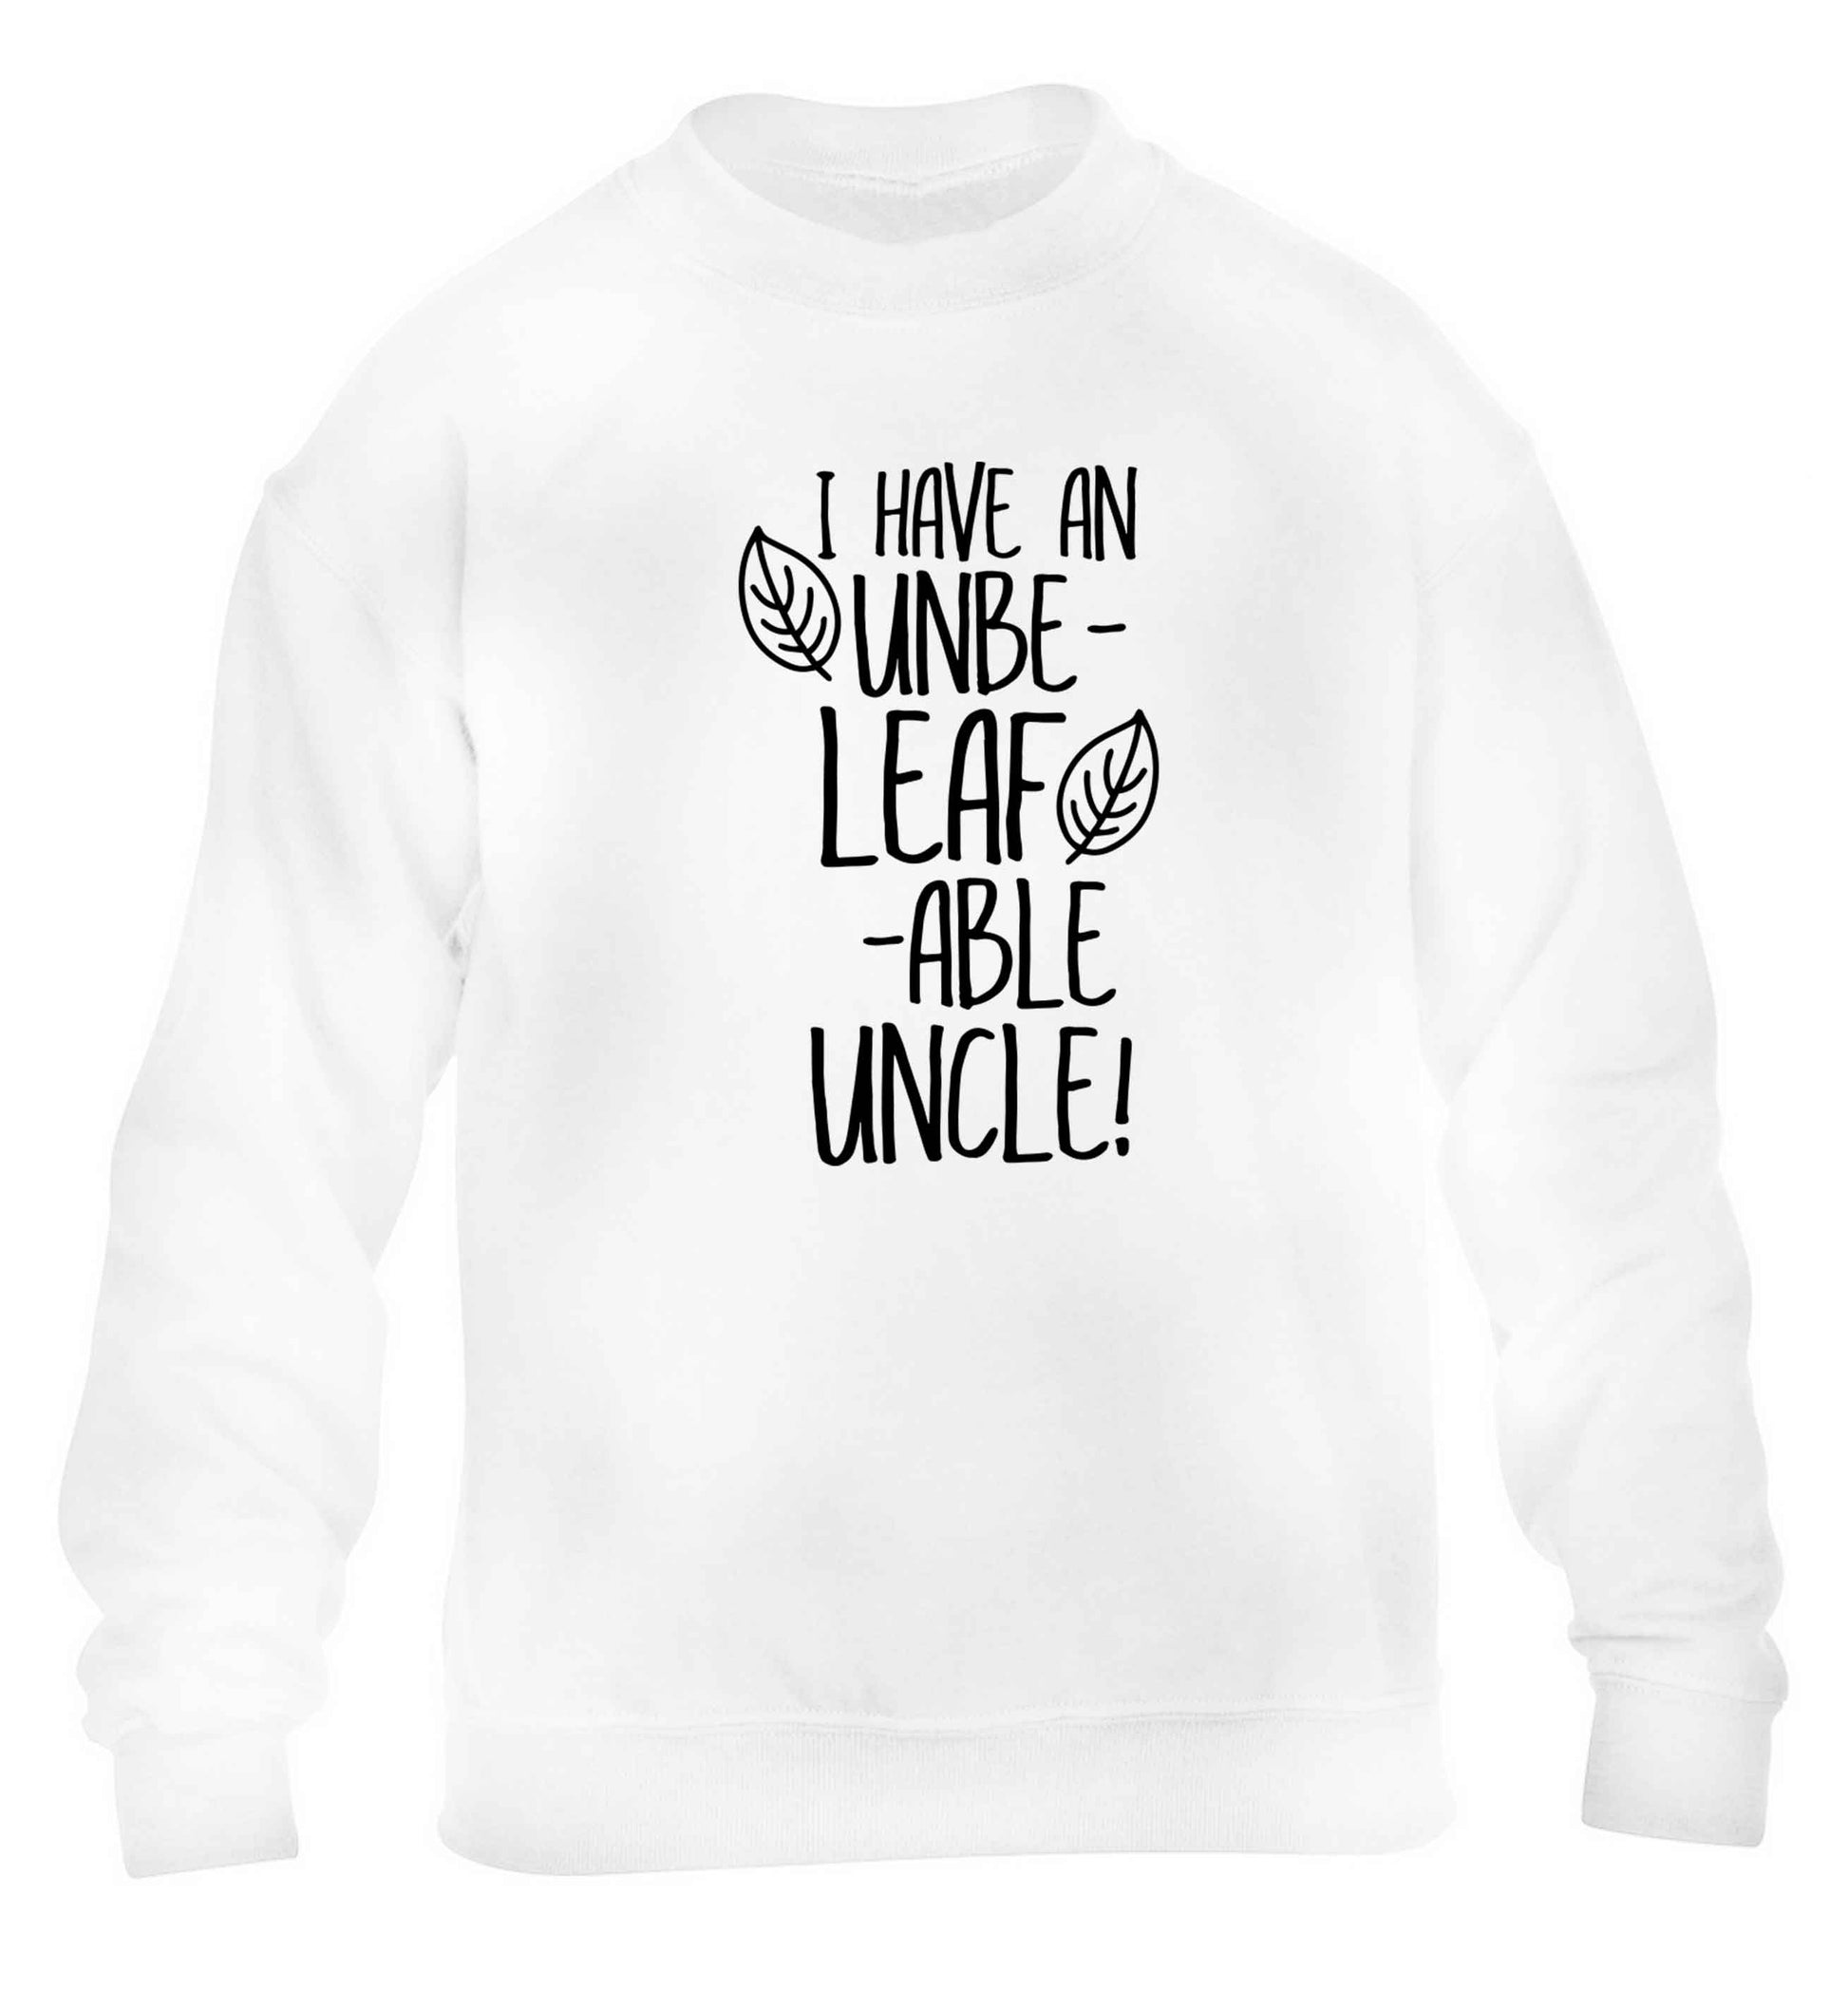 I have an unbe-leaf-able uncle children's white sweater 12-13 Years